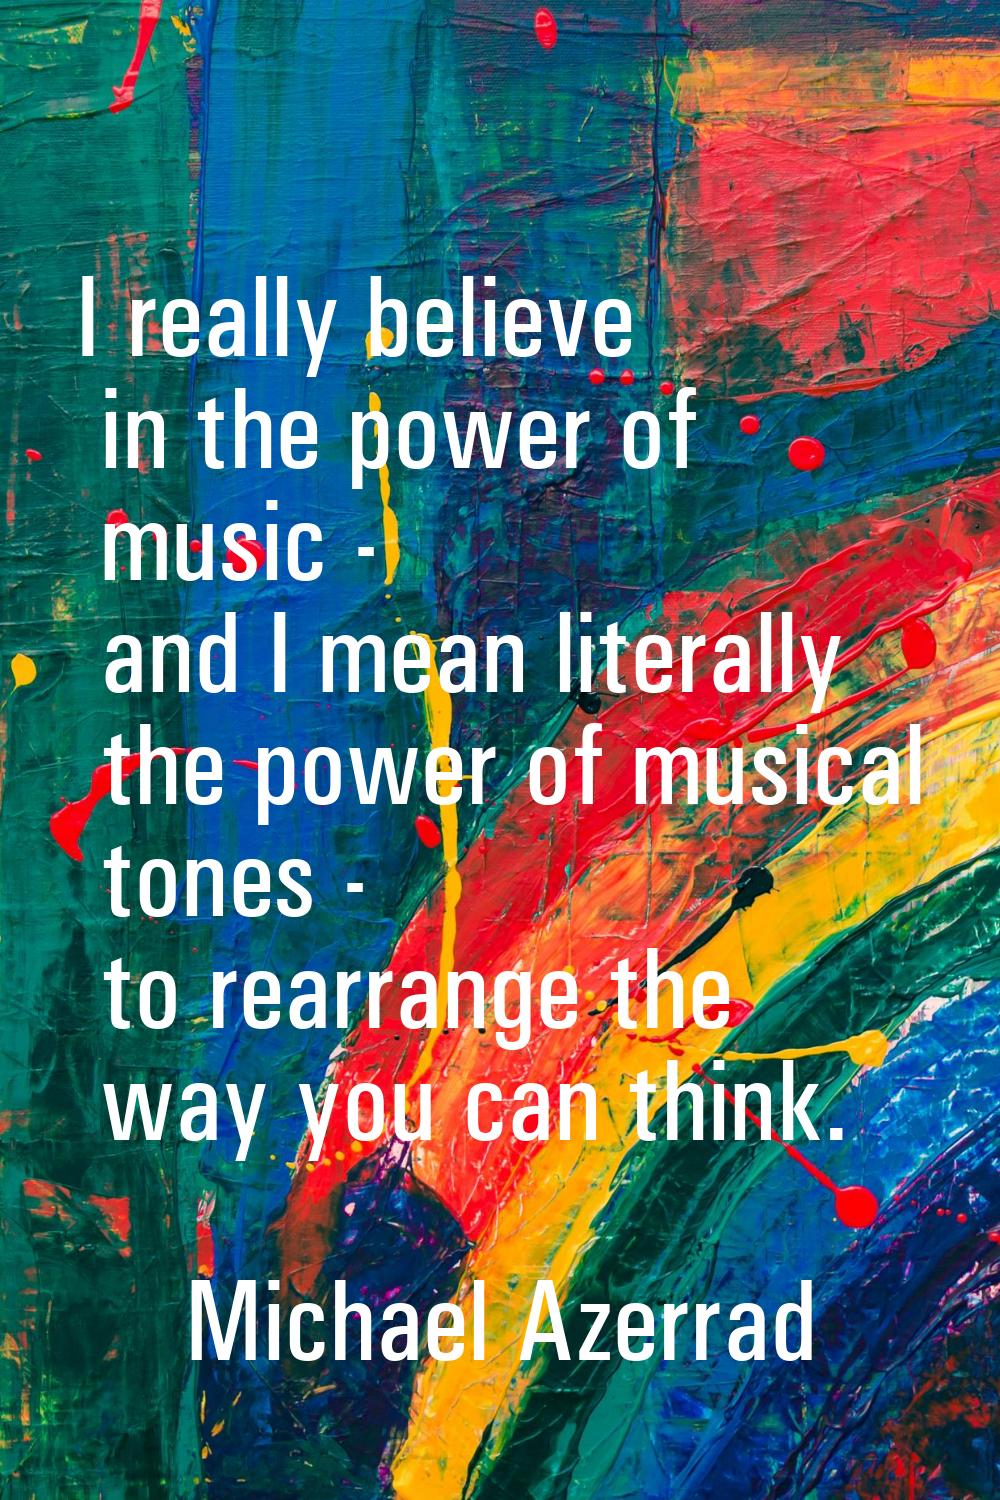 I really believe in the power of music - and I mean literally the power of musical tones - to rearr